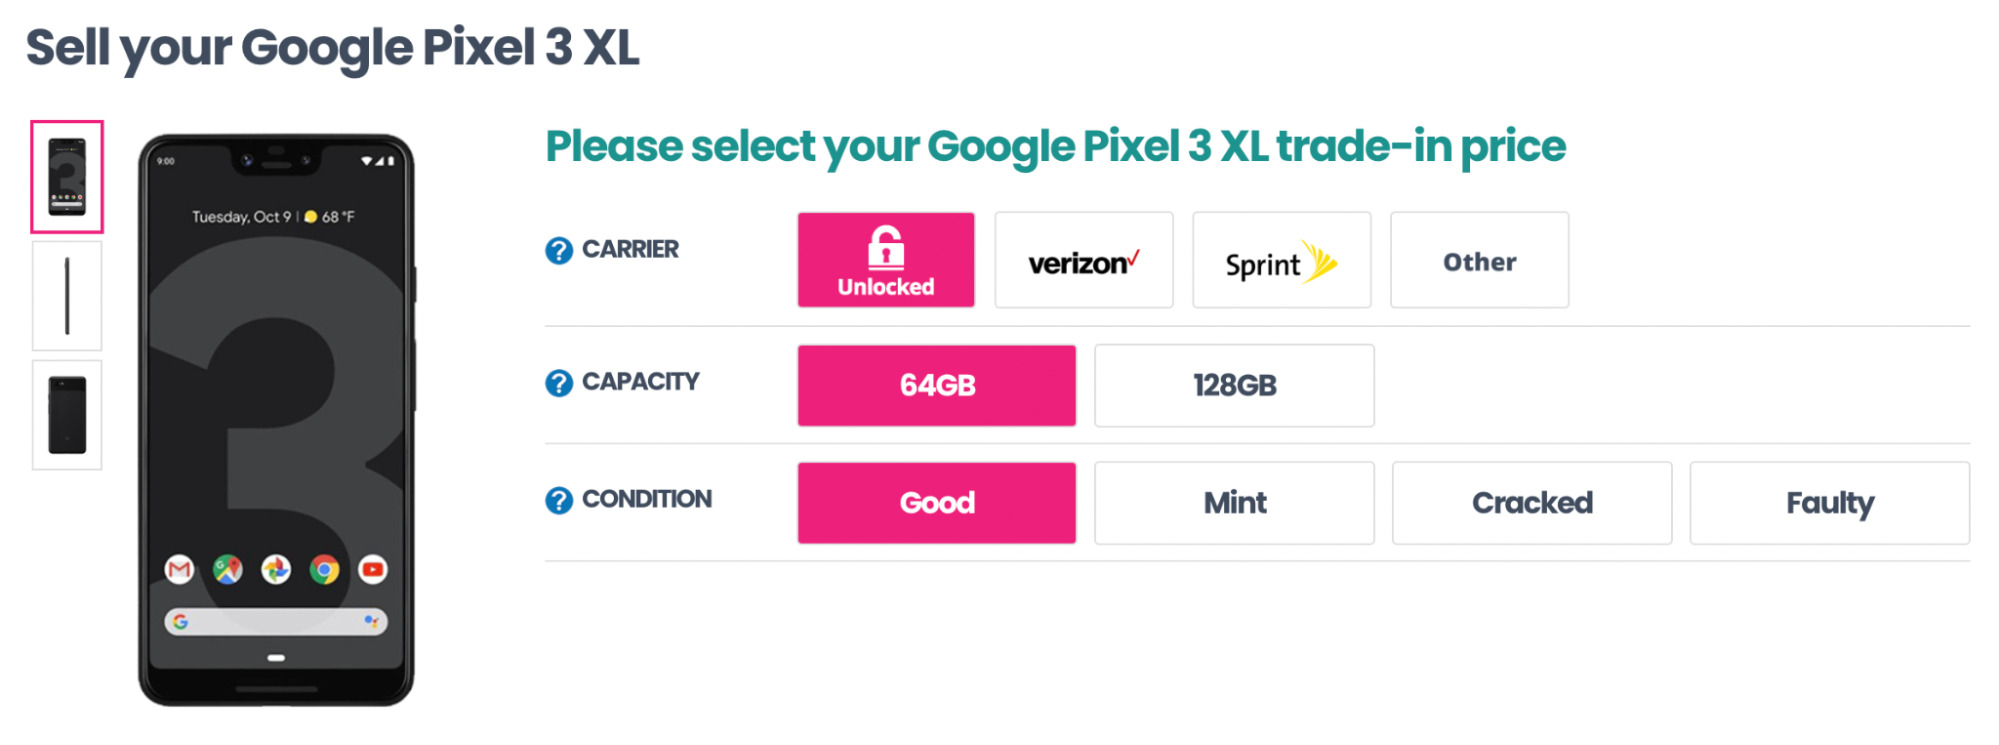 Affiliate landing page for selling used Google Pixel 3 XL